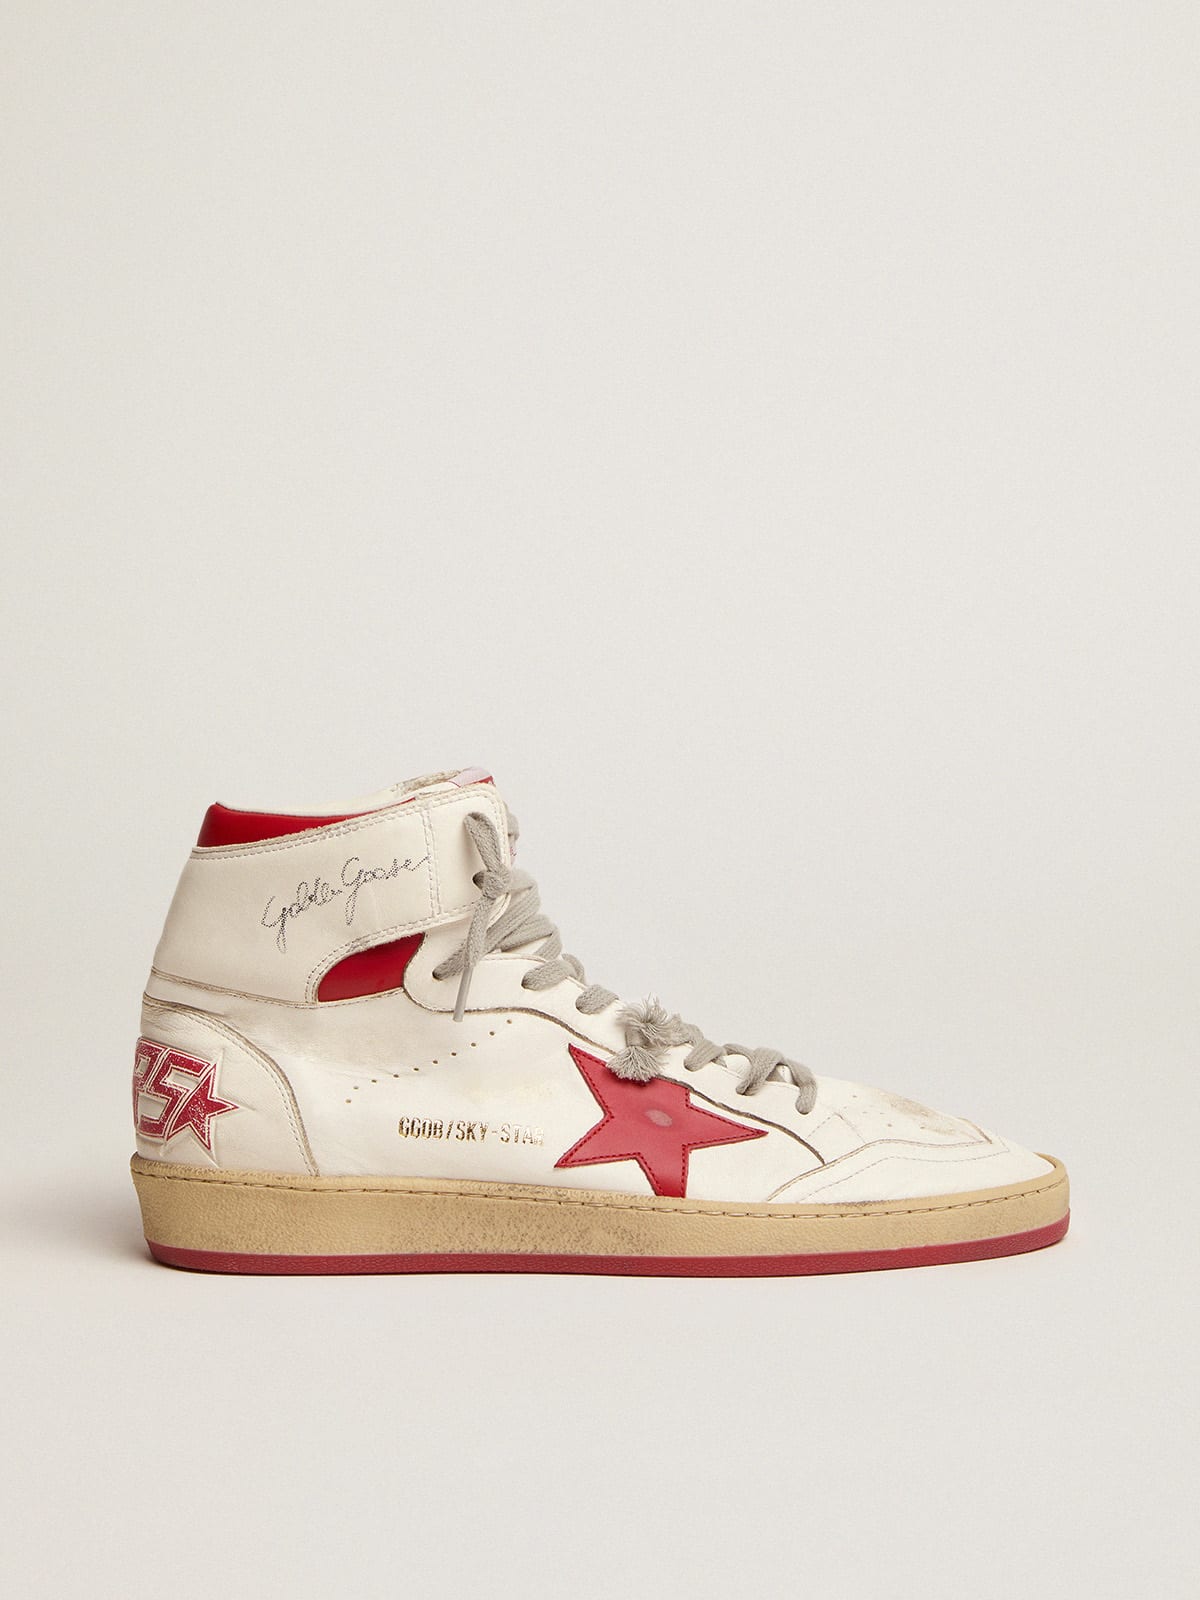 Golden Goose - Men's Sky-Star with signature on the ankle and red inserts in 